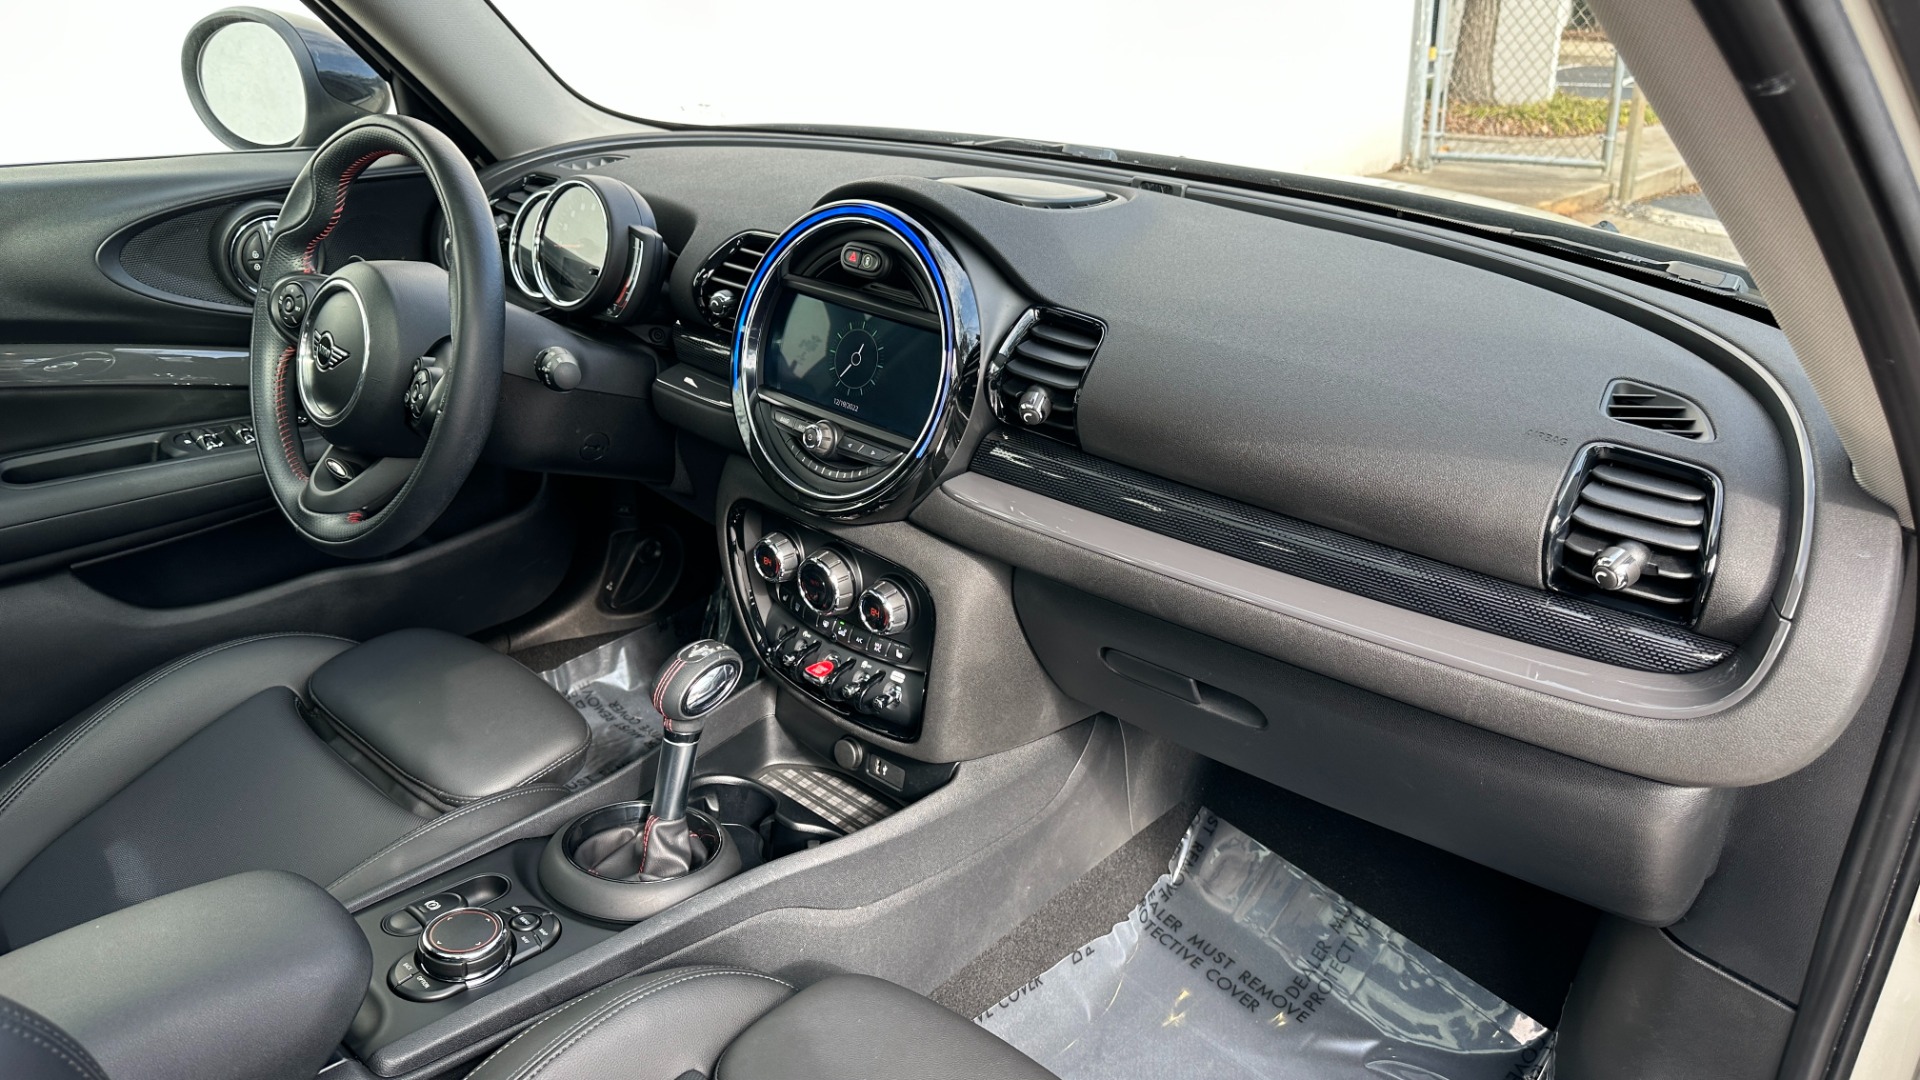 Used 2019 MINI Clubman COOPER S / NAVIGATION / ALL4 / HEATED SEATS / SPORT MODE / PADDLE SHIFTERS for sale $26,595 at Formula Imports in Charlotte NC 28227 21